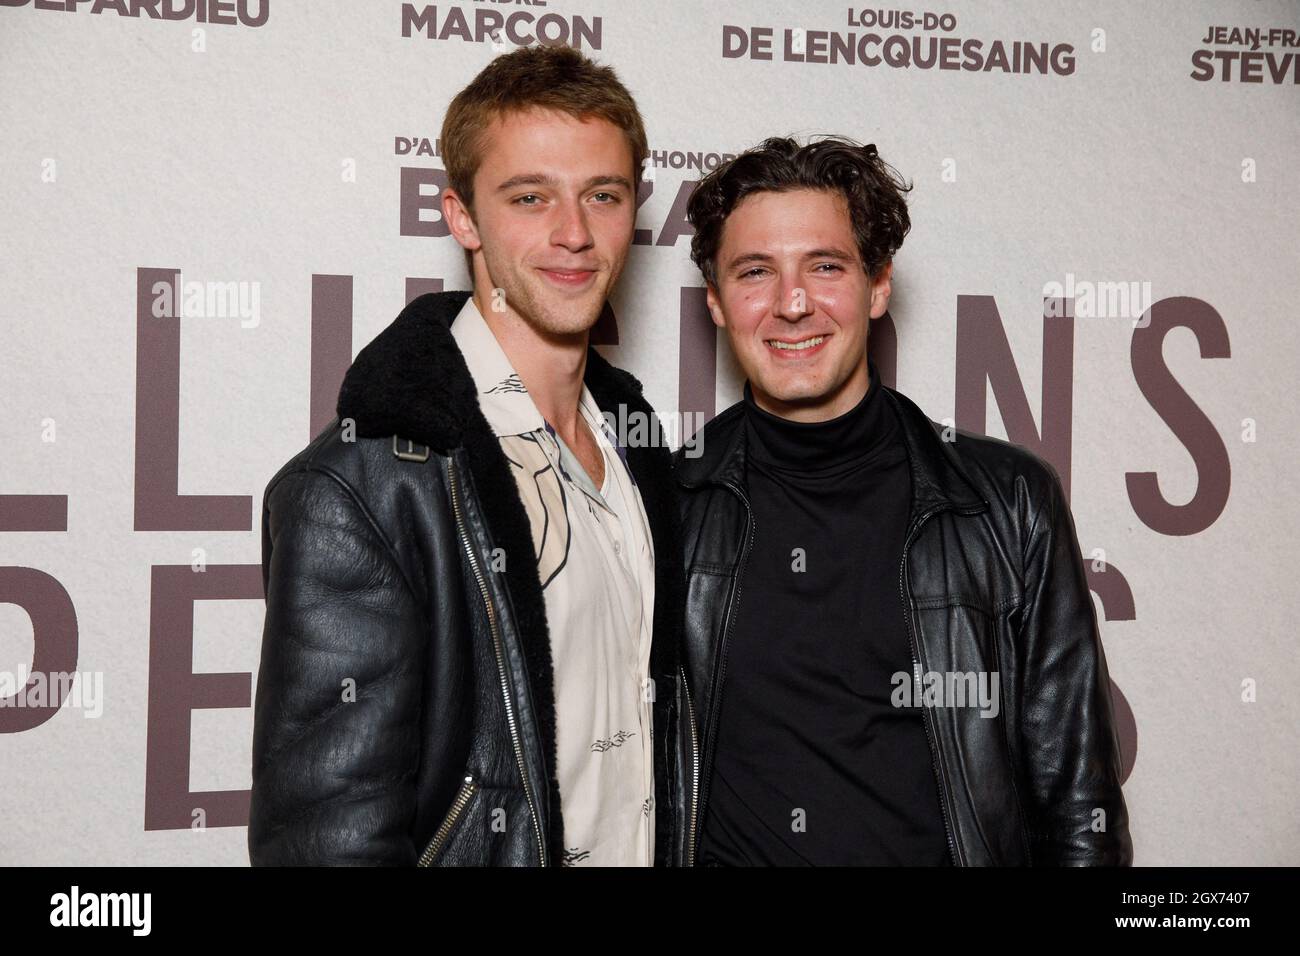 Benjamin Voisin, Vincent Lacoste attending the premiere of Illusions  Perdues held at the UGC Normandie in Paris, France on October 4, 2021.  Photo by David Boyer/ABACAPRESS.COM Stock Photo - Alamy